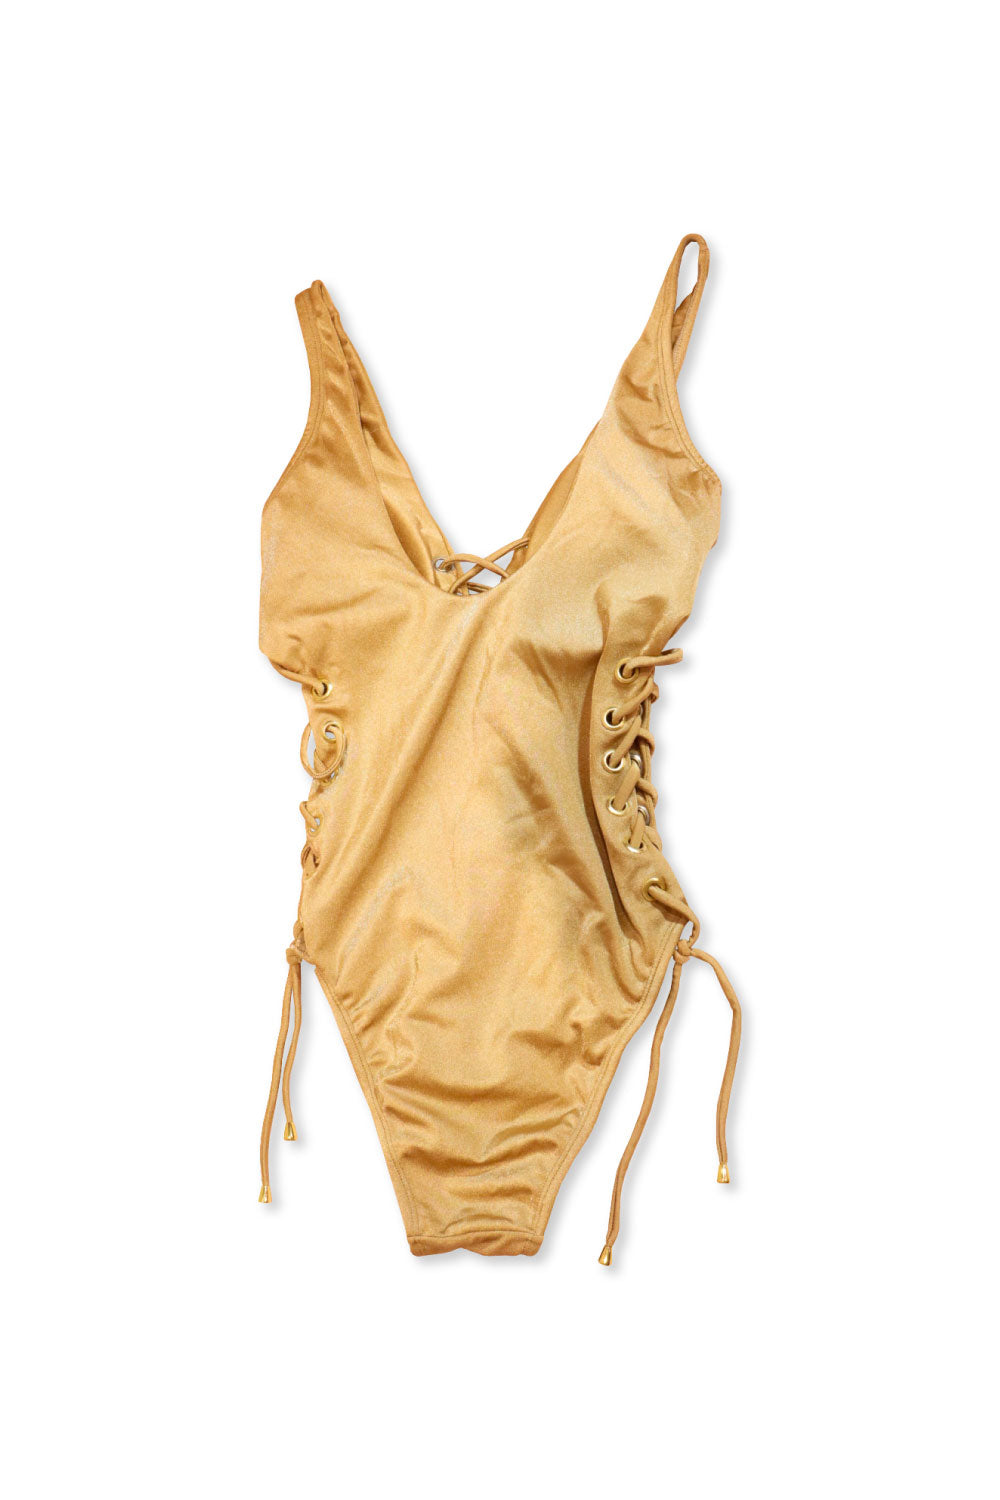 Image of the back of Lateen's Open-Sided One Piece Swimsuit in Gold.